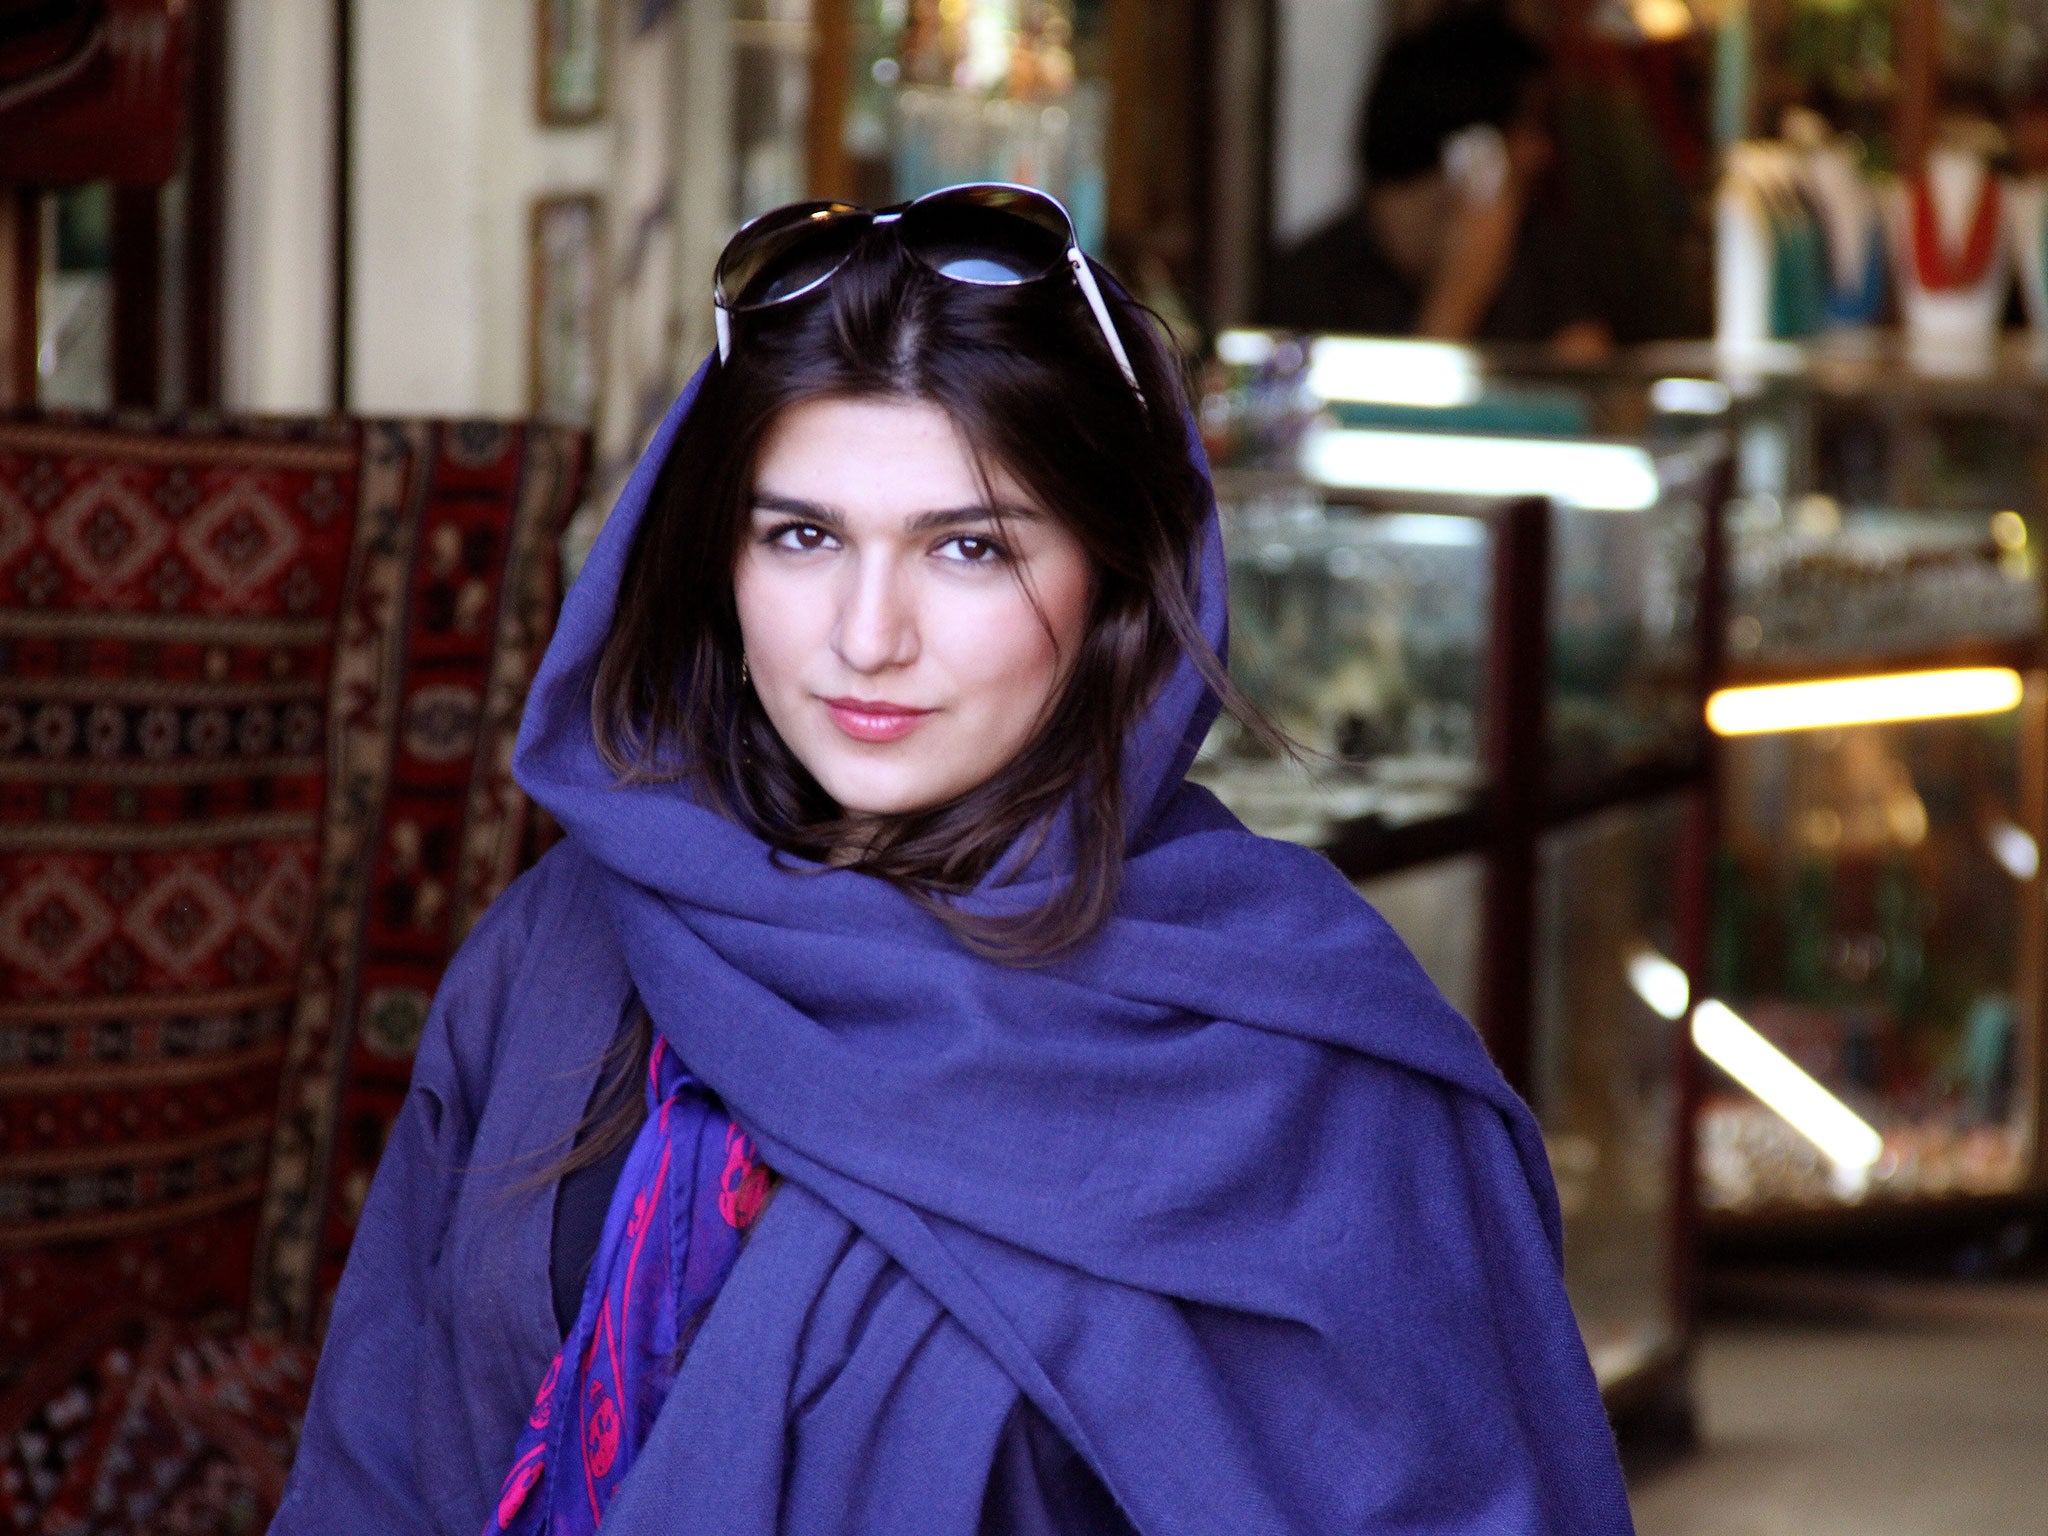 Ghoncheh Ghavami, of west London, was sentenced to one year in prison for trying to attend a volleyball game in Tehran